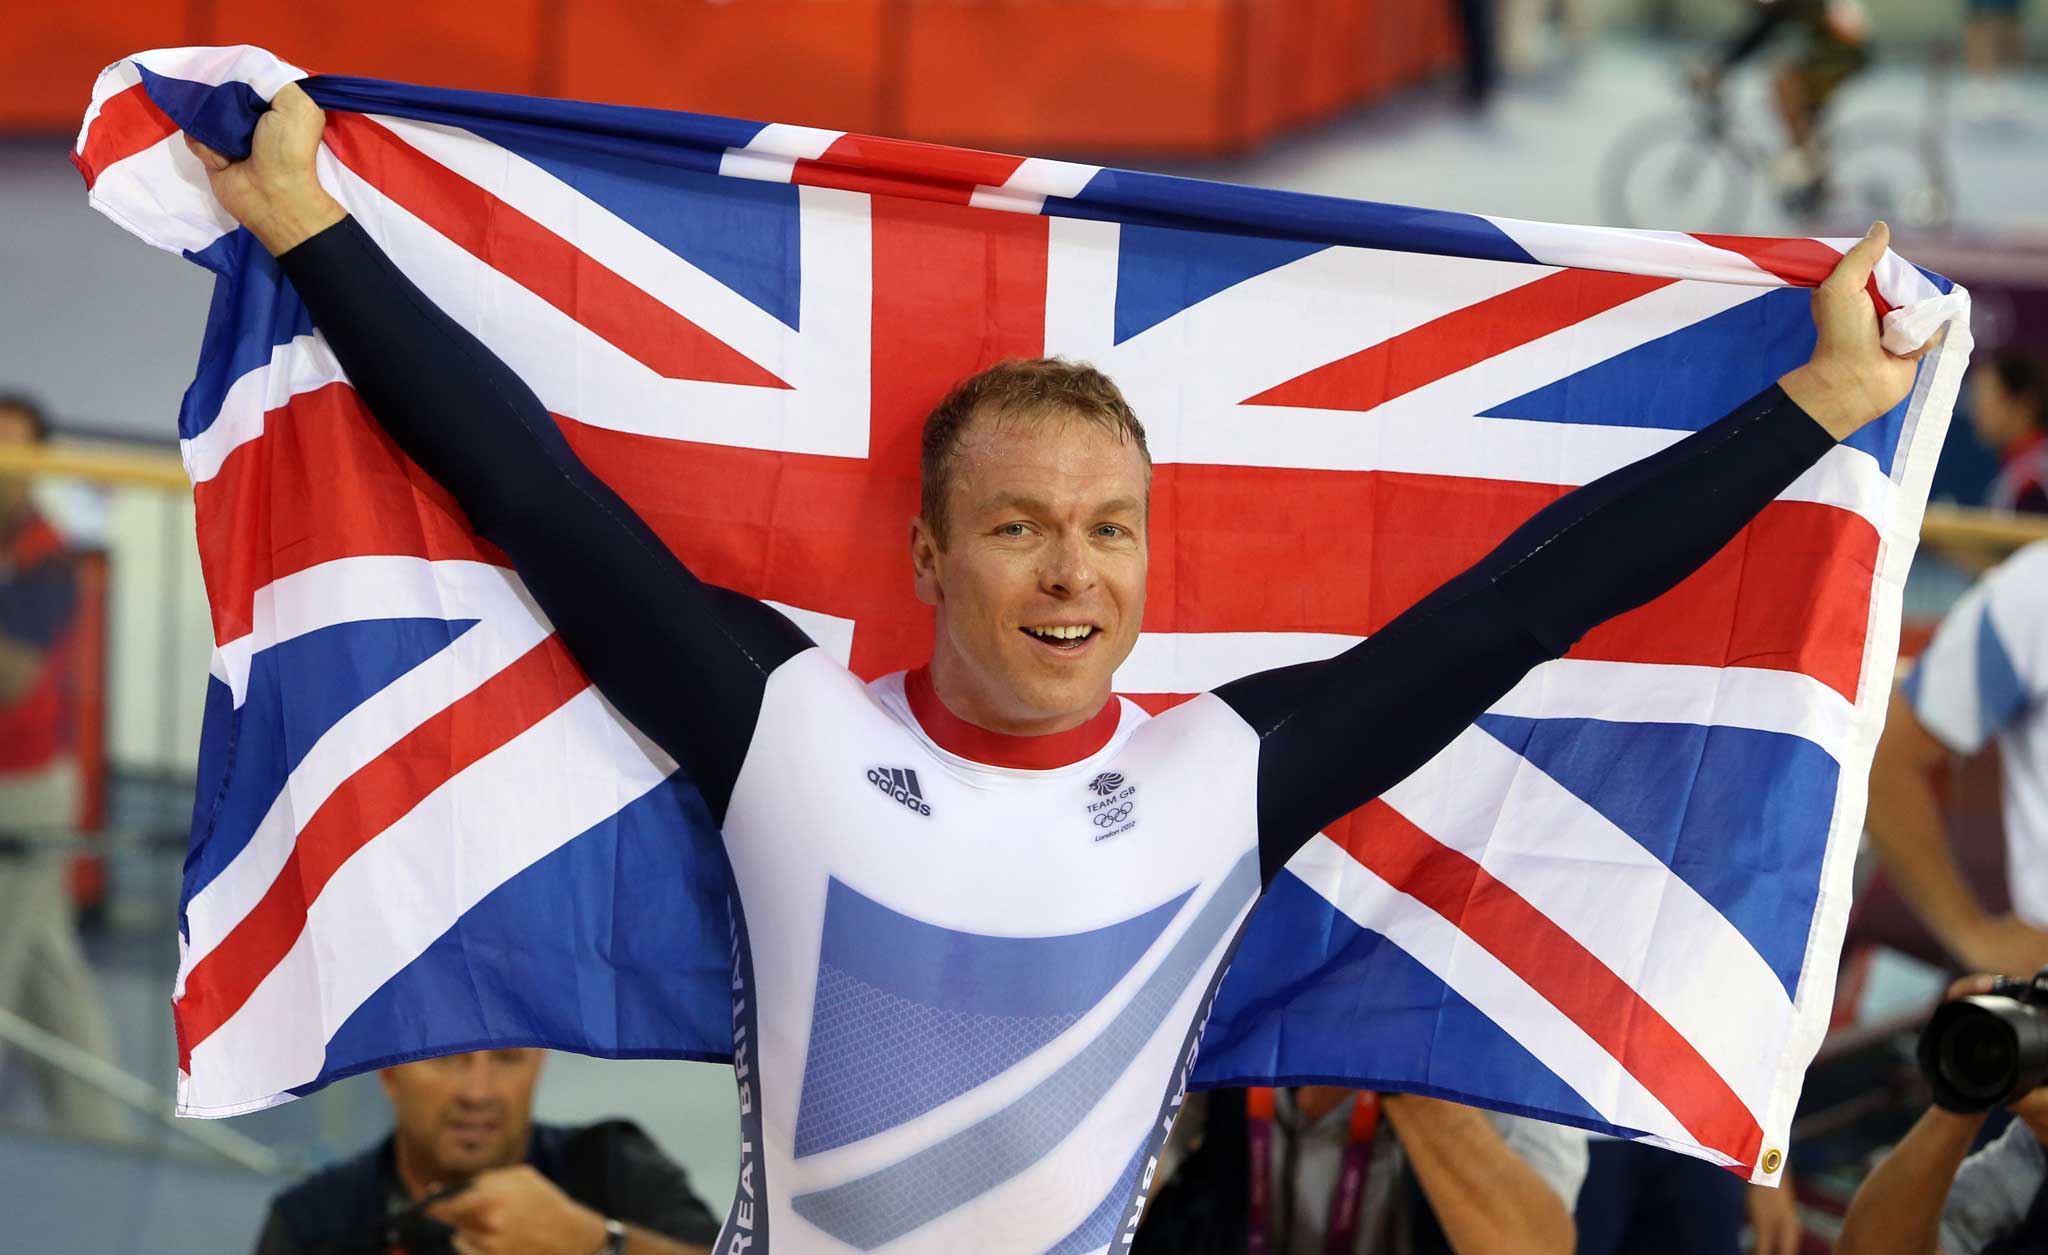 Sir Chris Hoy won six Olympic golds - in which four events?